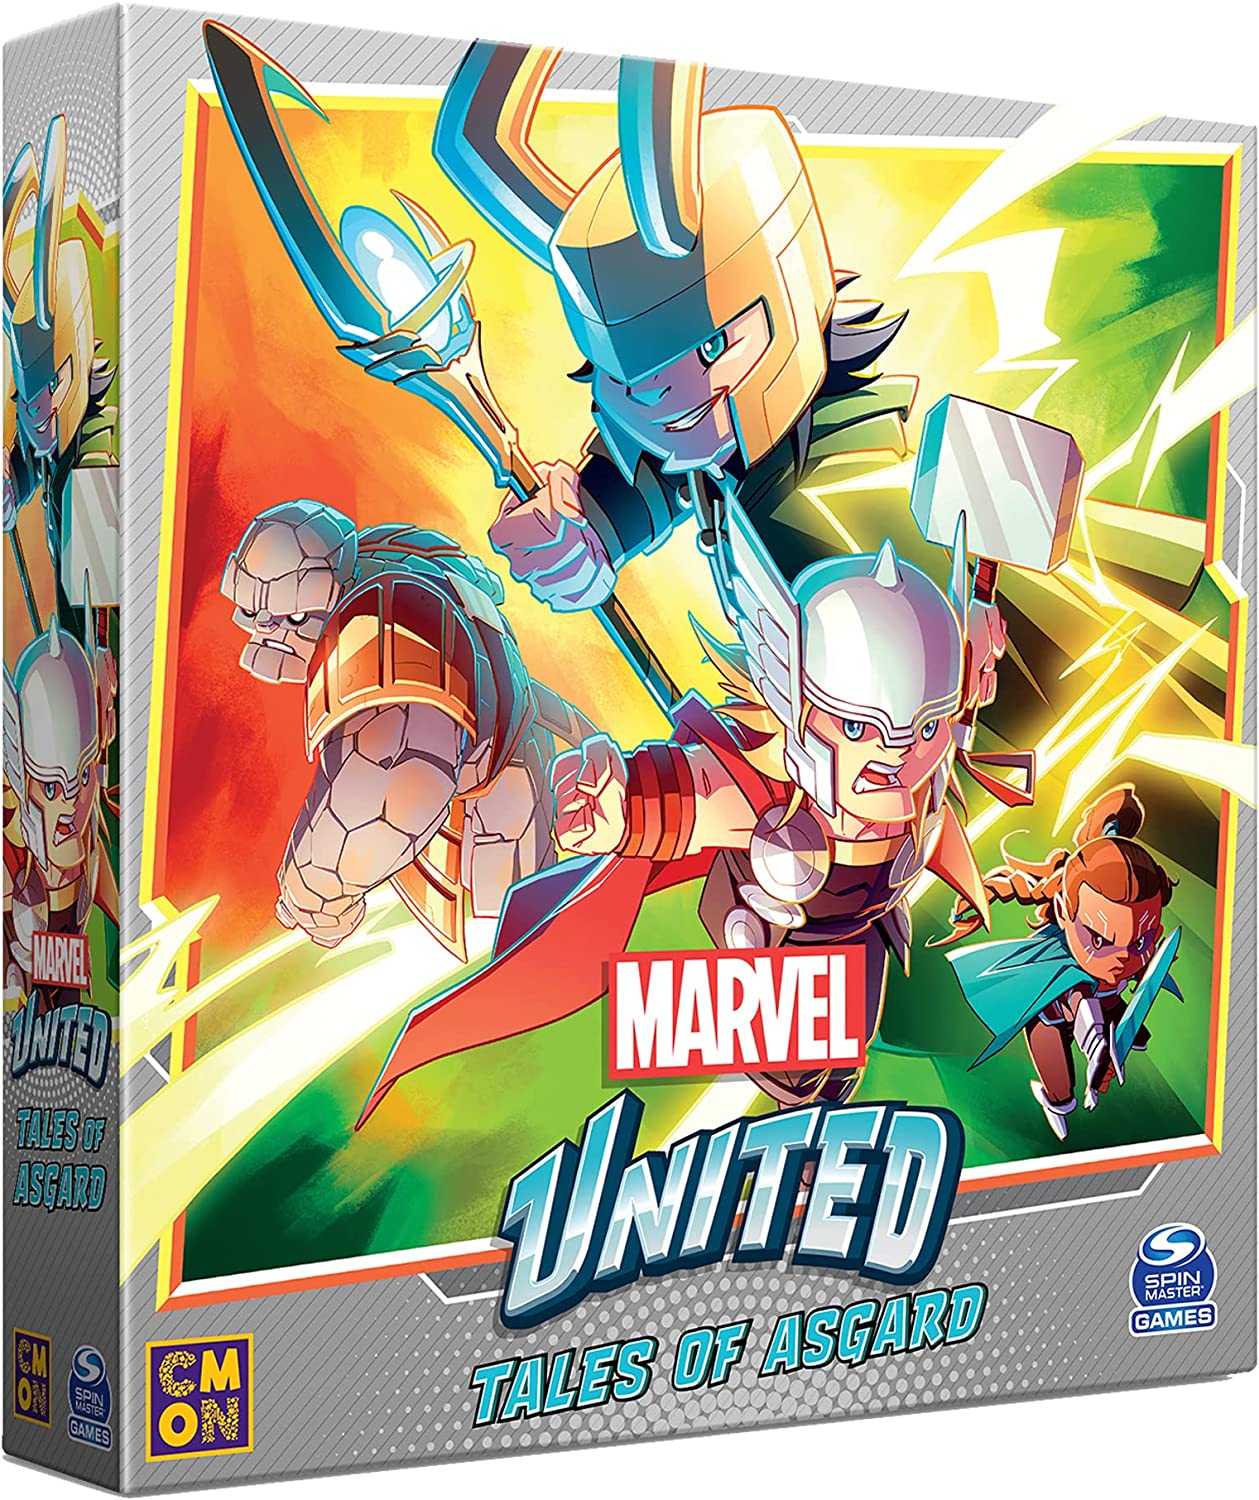 Cool Mini Or Not Marvel United: Tales of Asgard